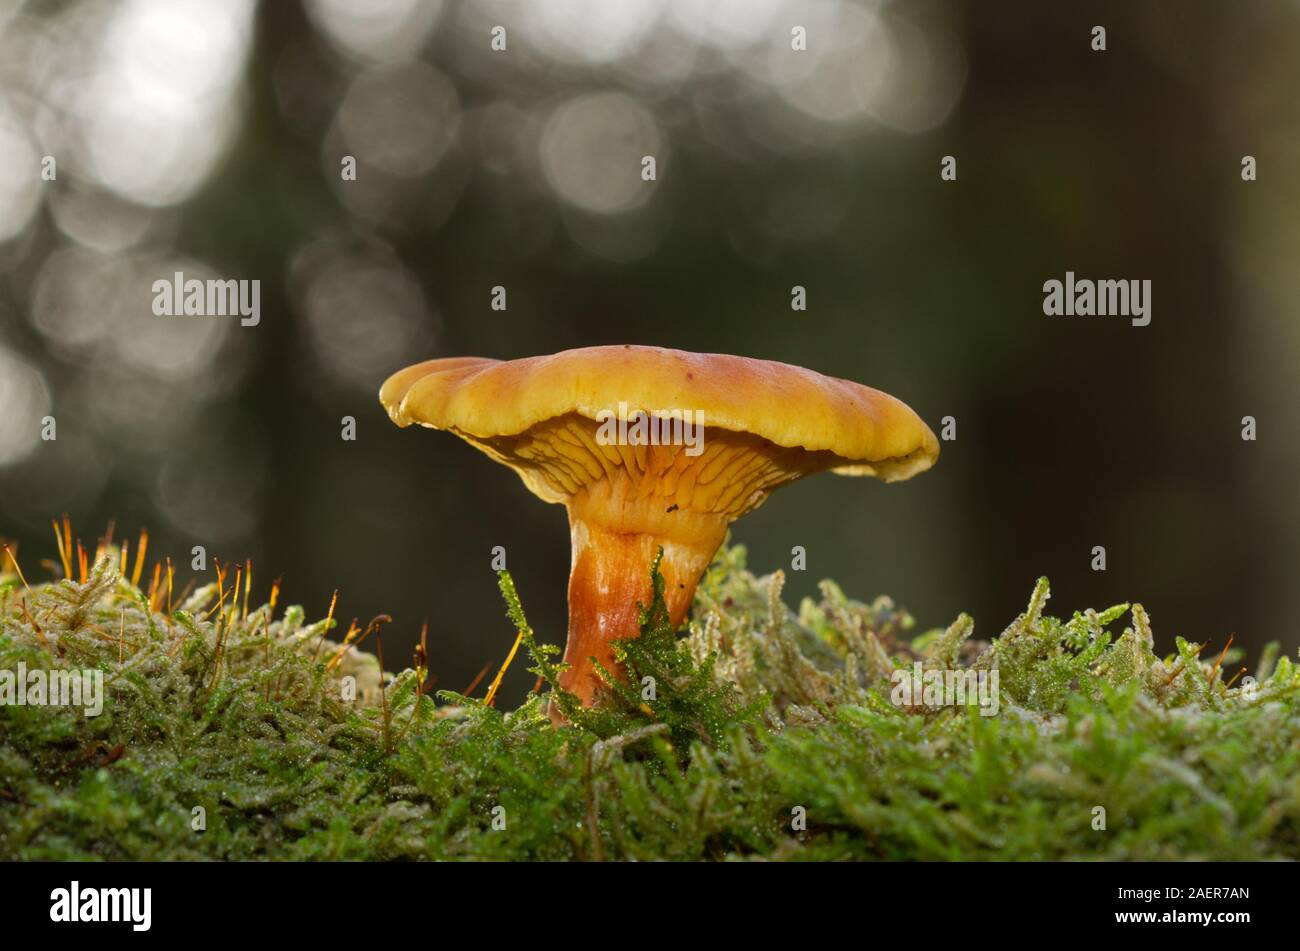 Scaly Rustgill mushroom, seen diagonally from below, growing in moss in a dark forest Stock Photo